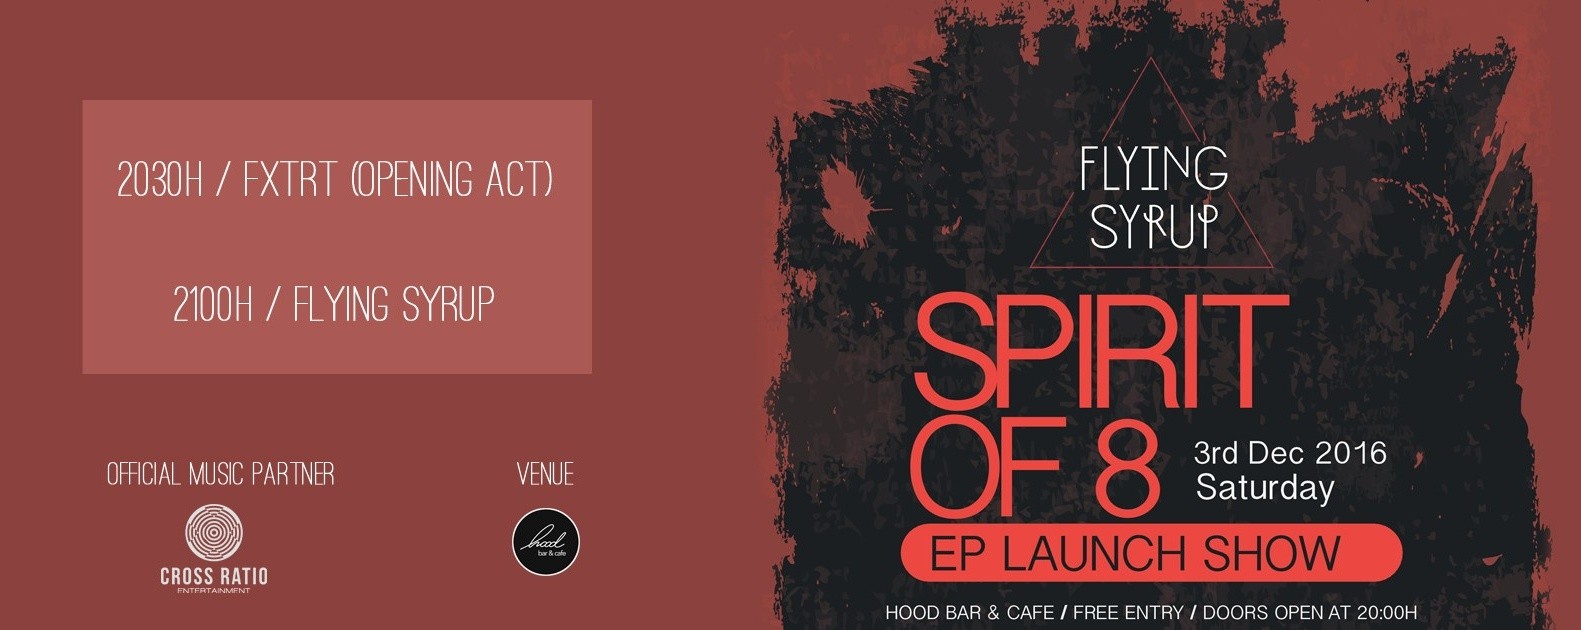 Flying Syrup - Spirit of 8 (EP Launch)